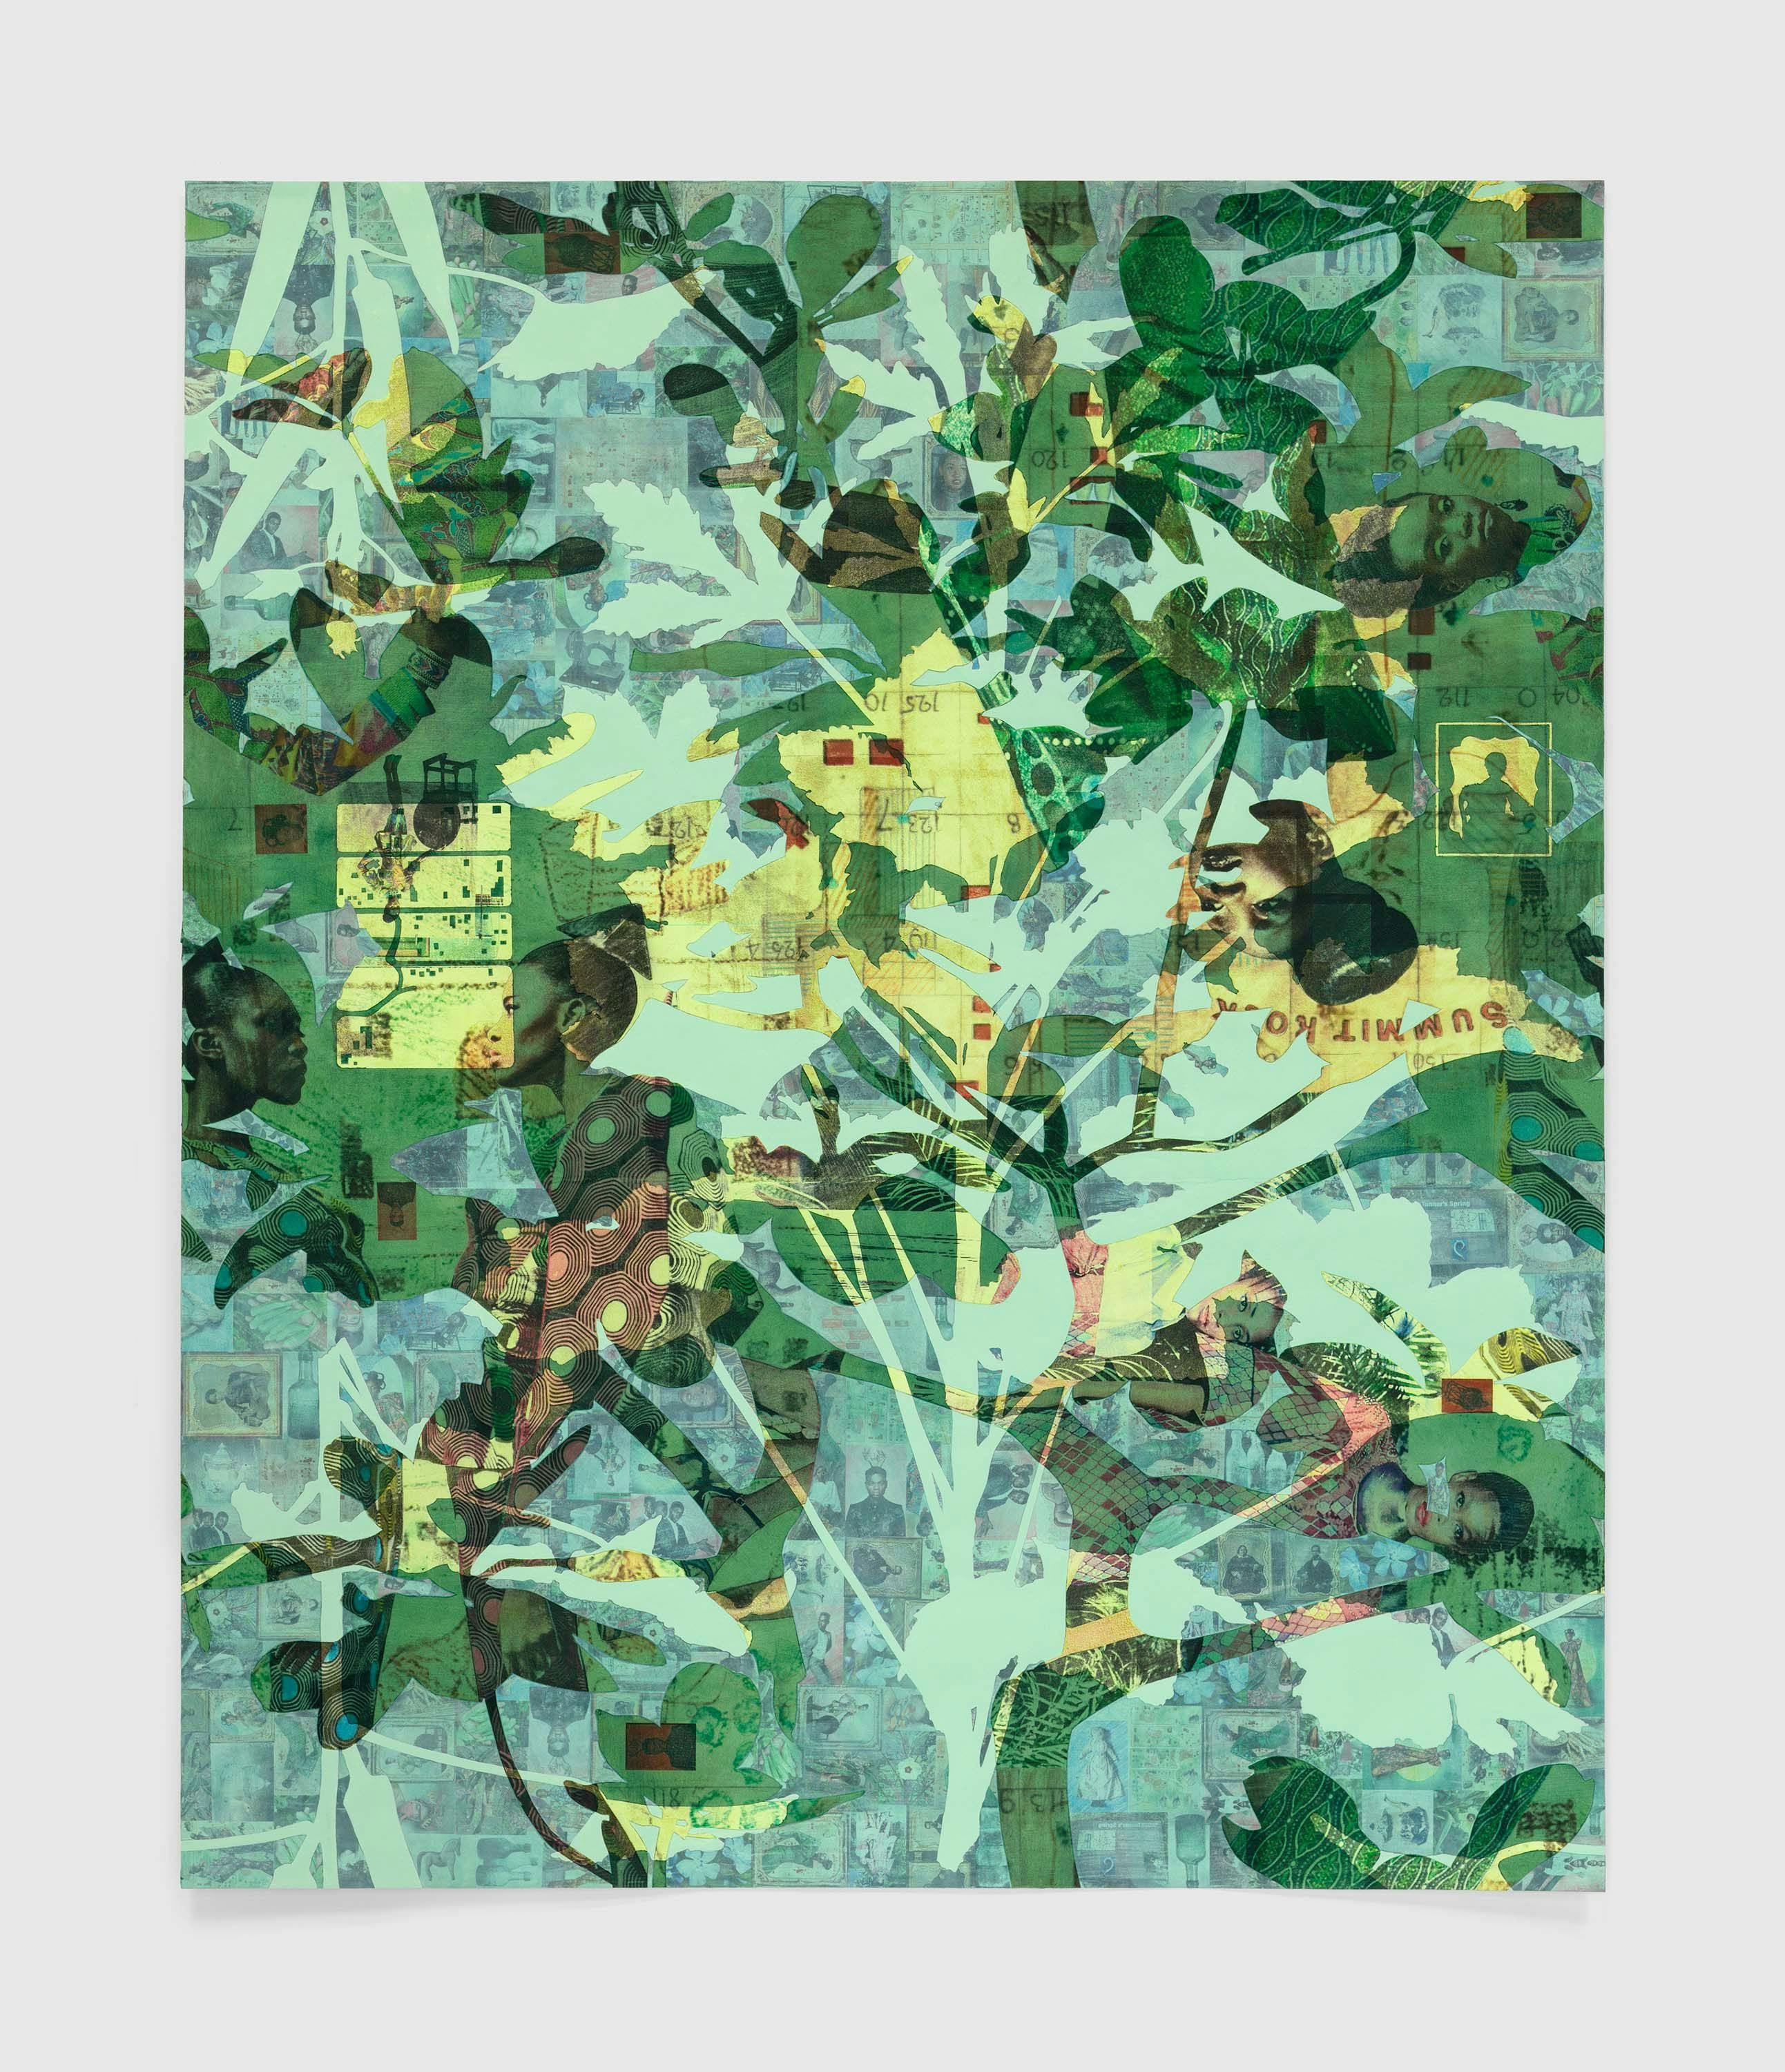 A work on paper by Njideka Akunyili Crosby, titled Potential, Displaced, dated 2021.